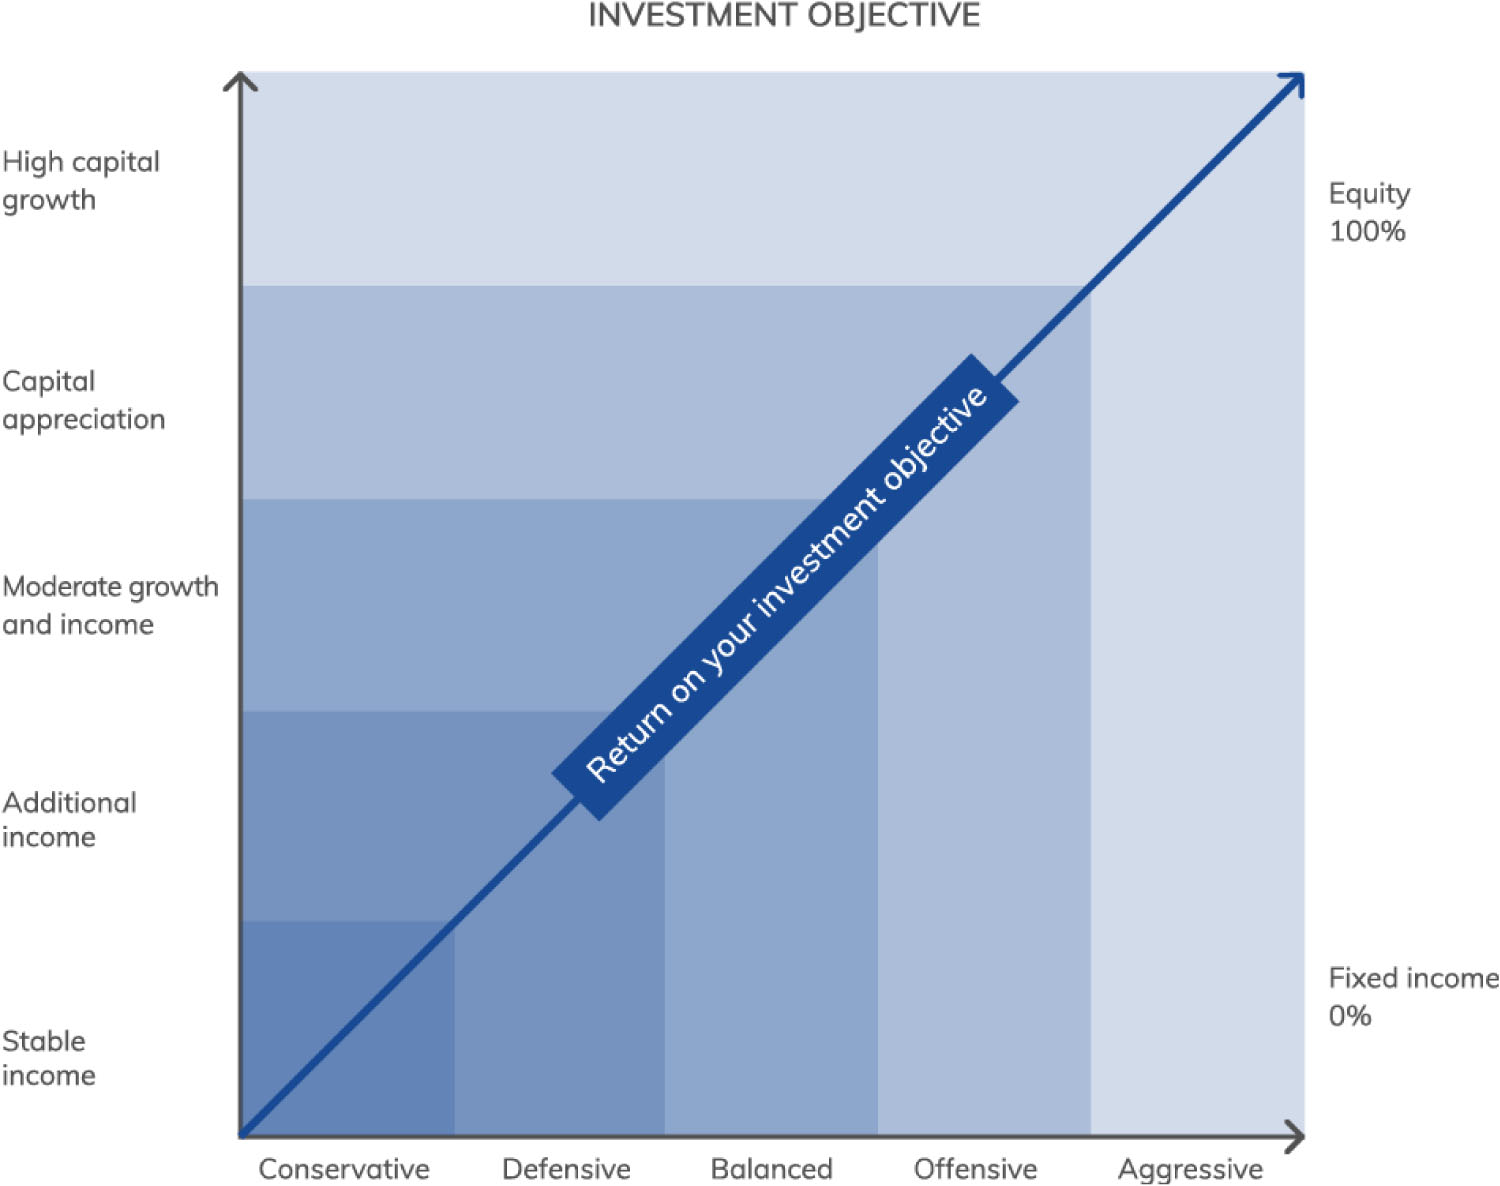 risk objective